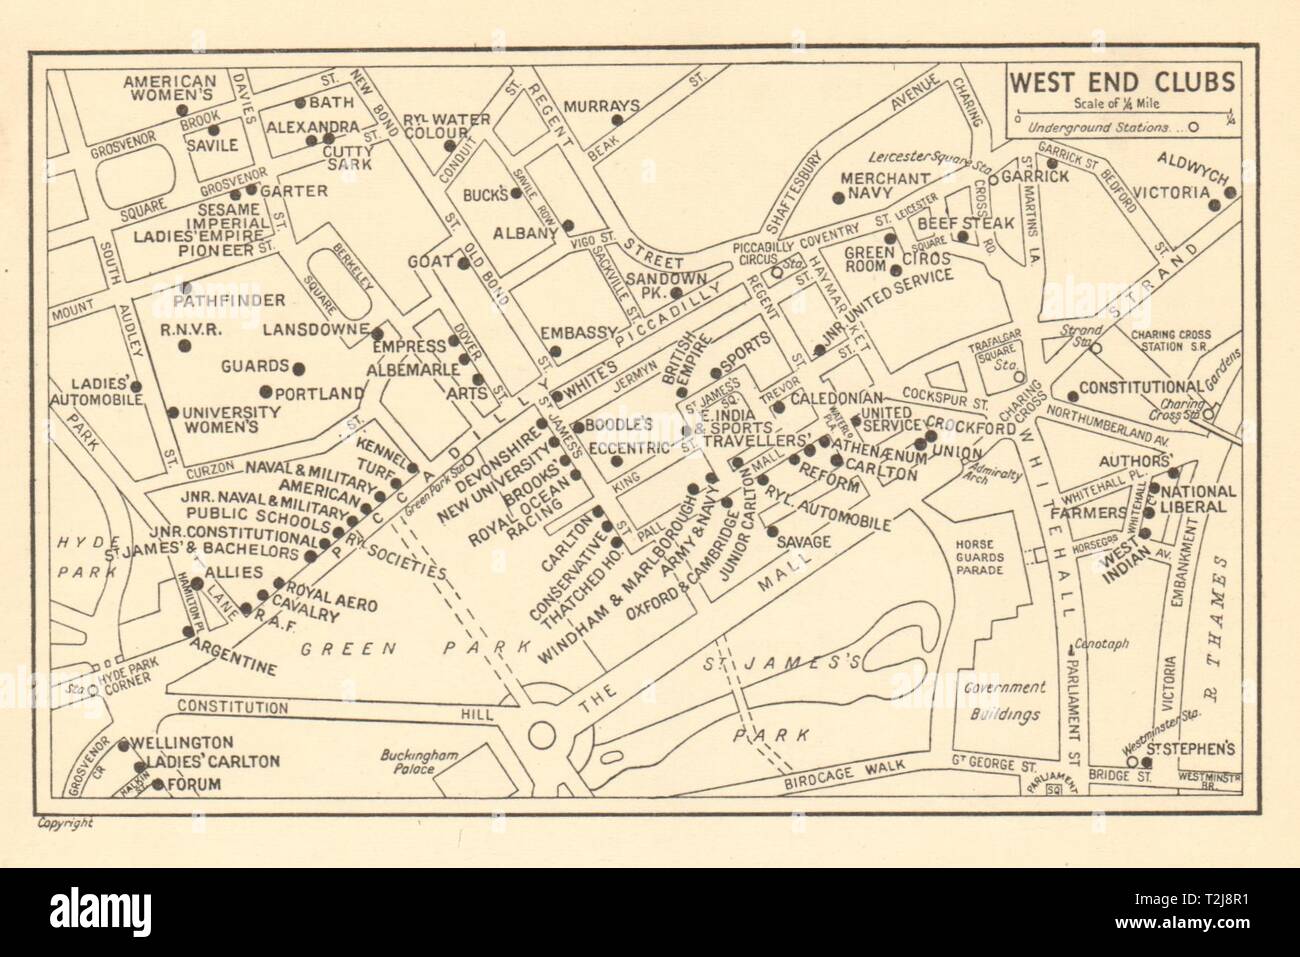 LONDON West End/St James's Gentlemens' & Ladies' Clubs GEOGRAPHERS' A-Z 1948 map Stock Photo